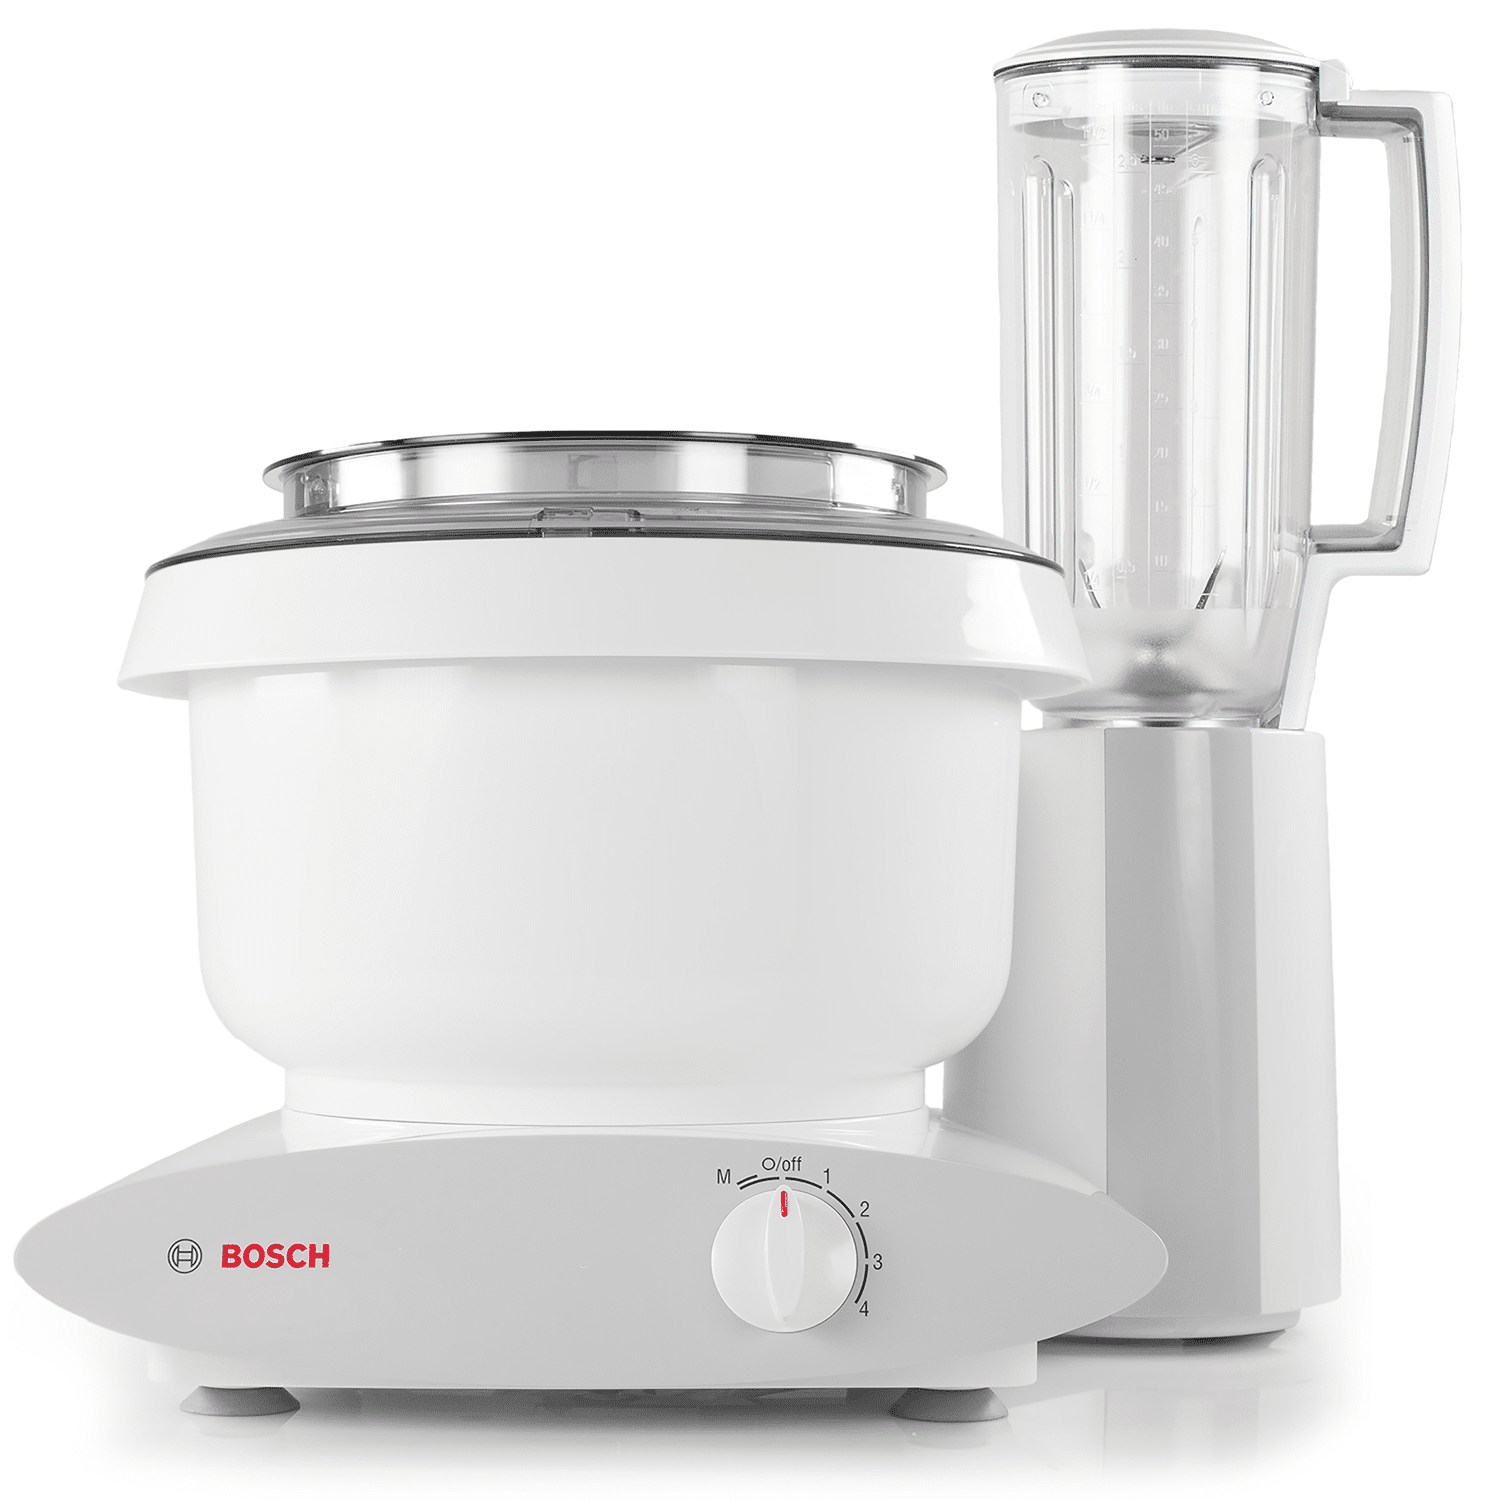 Food processor attachment for the Bosch Universal mixer at PHG